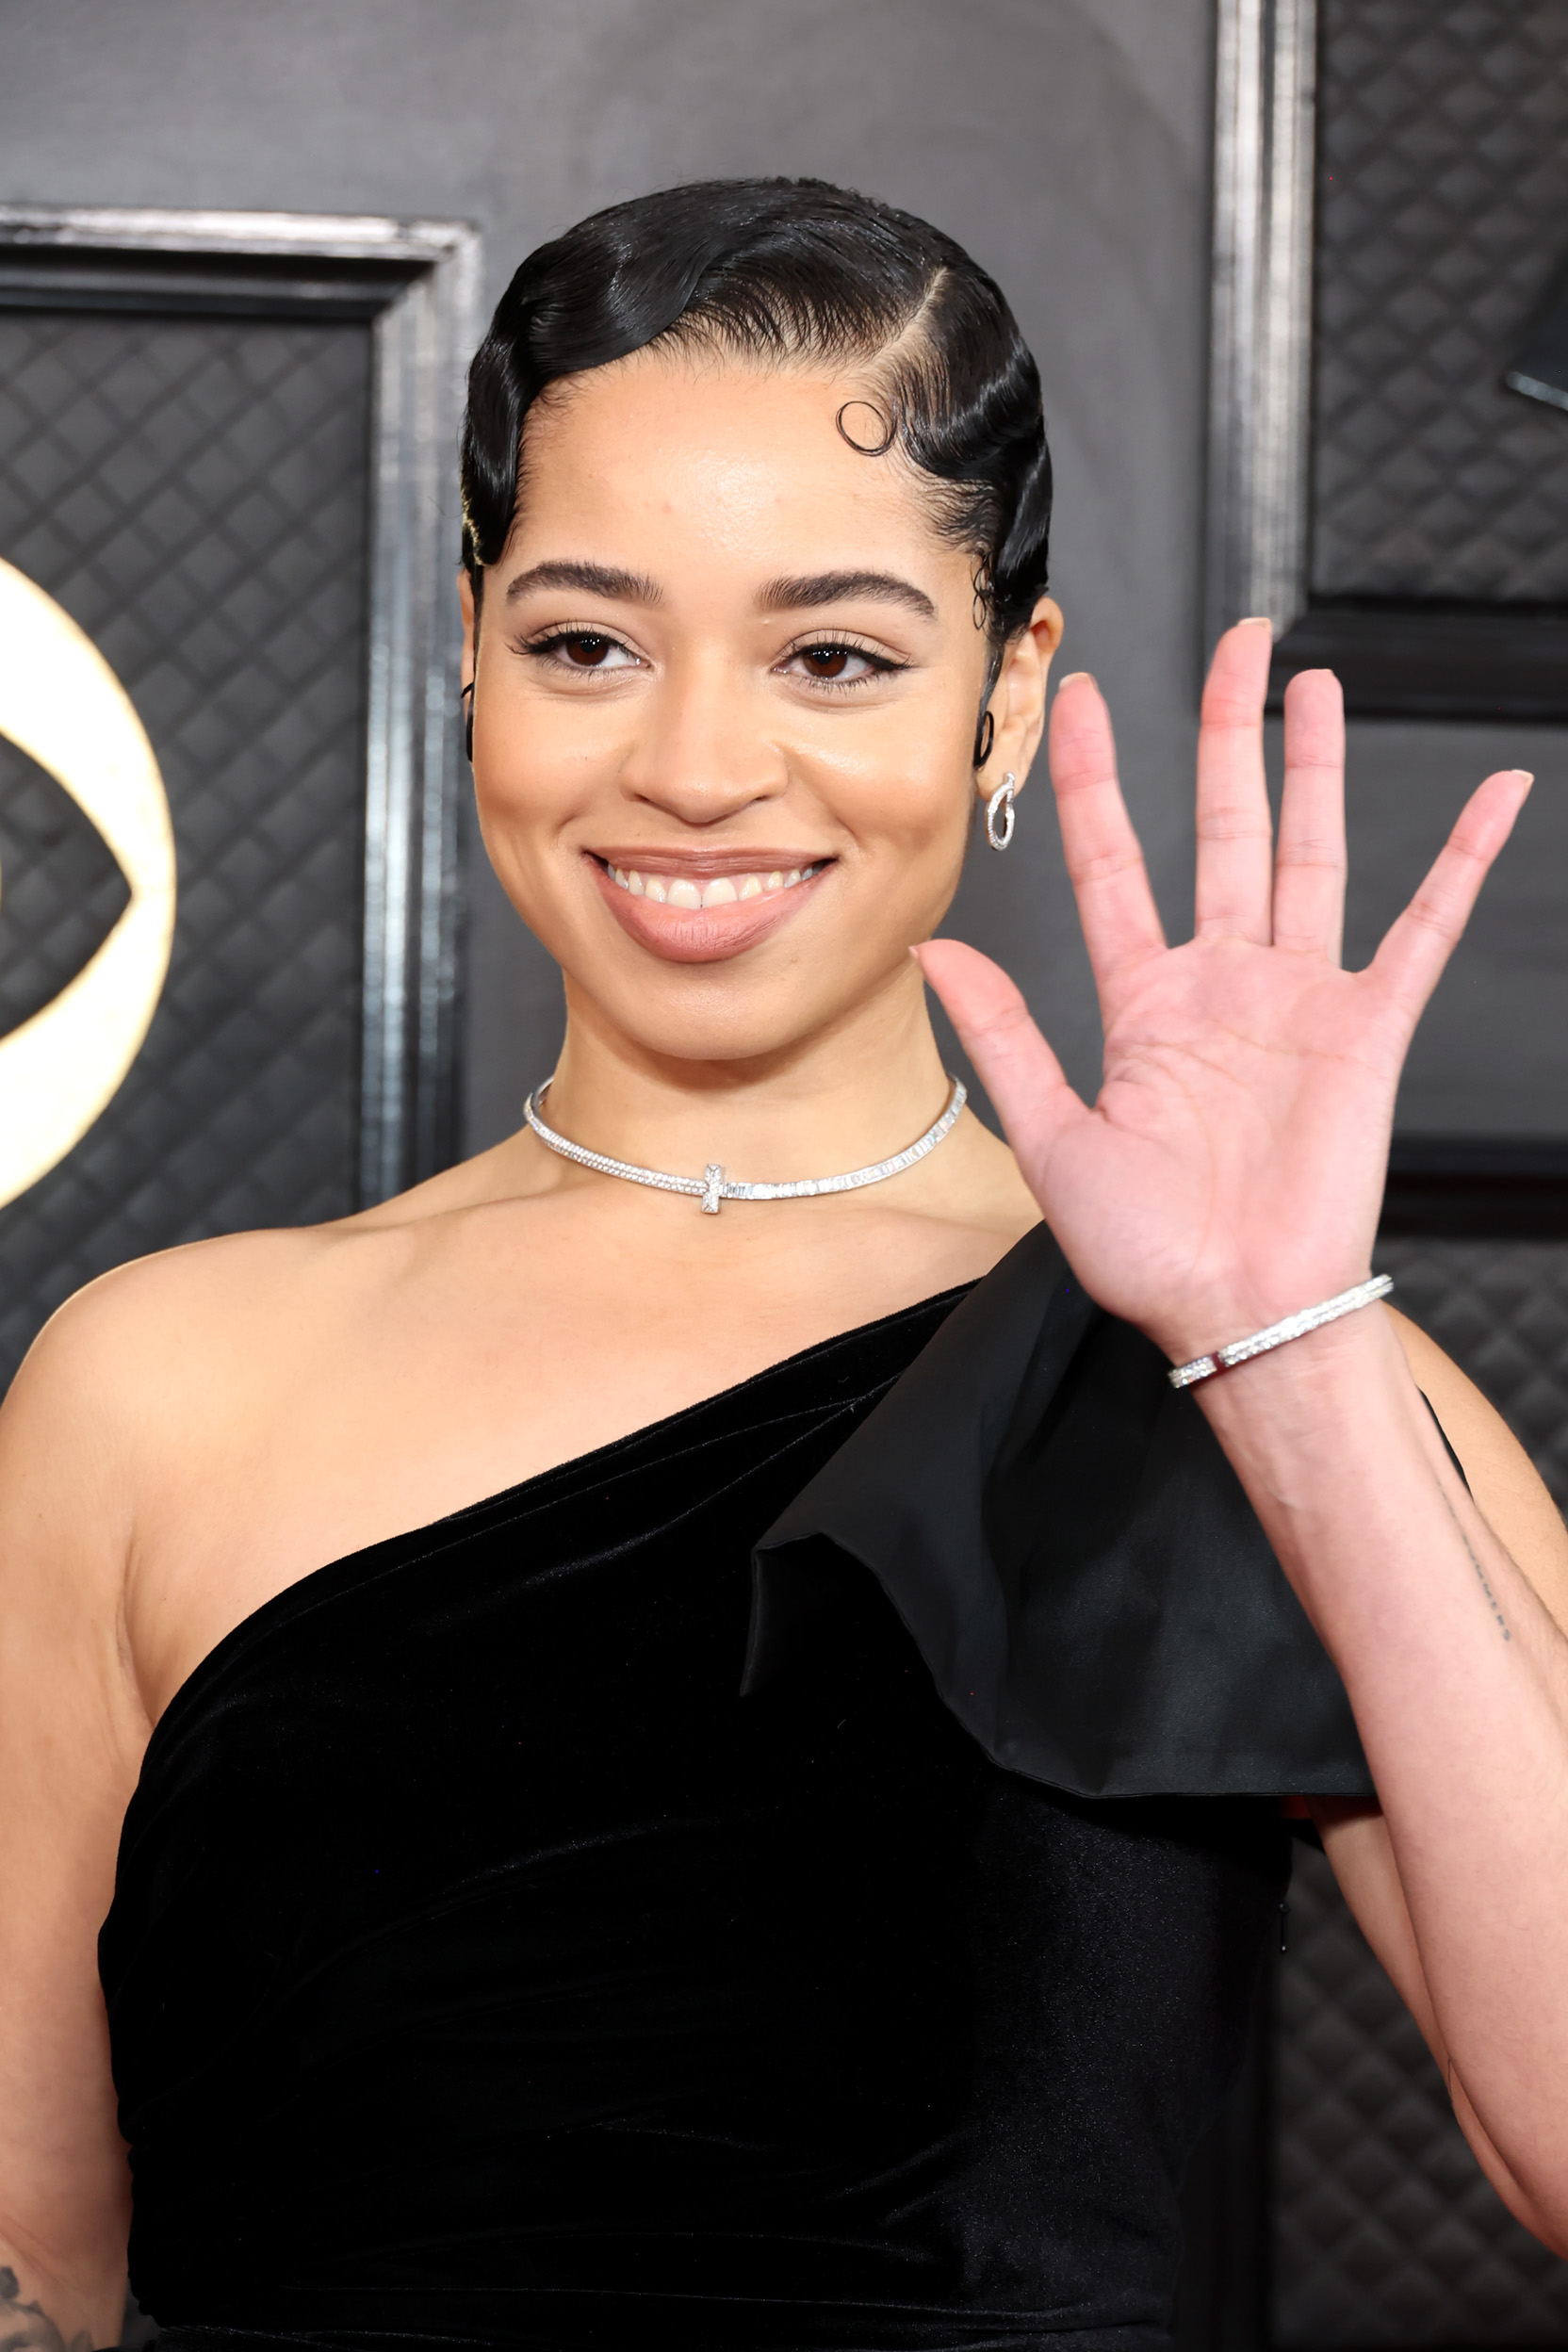 Ella Mai at the 65th GRAMMY Awards on February 5, 2023, in Los Angeles, California. | Source: Getty Images